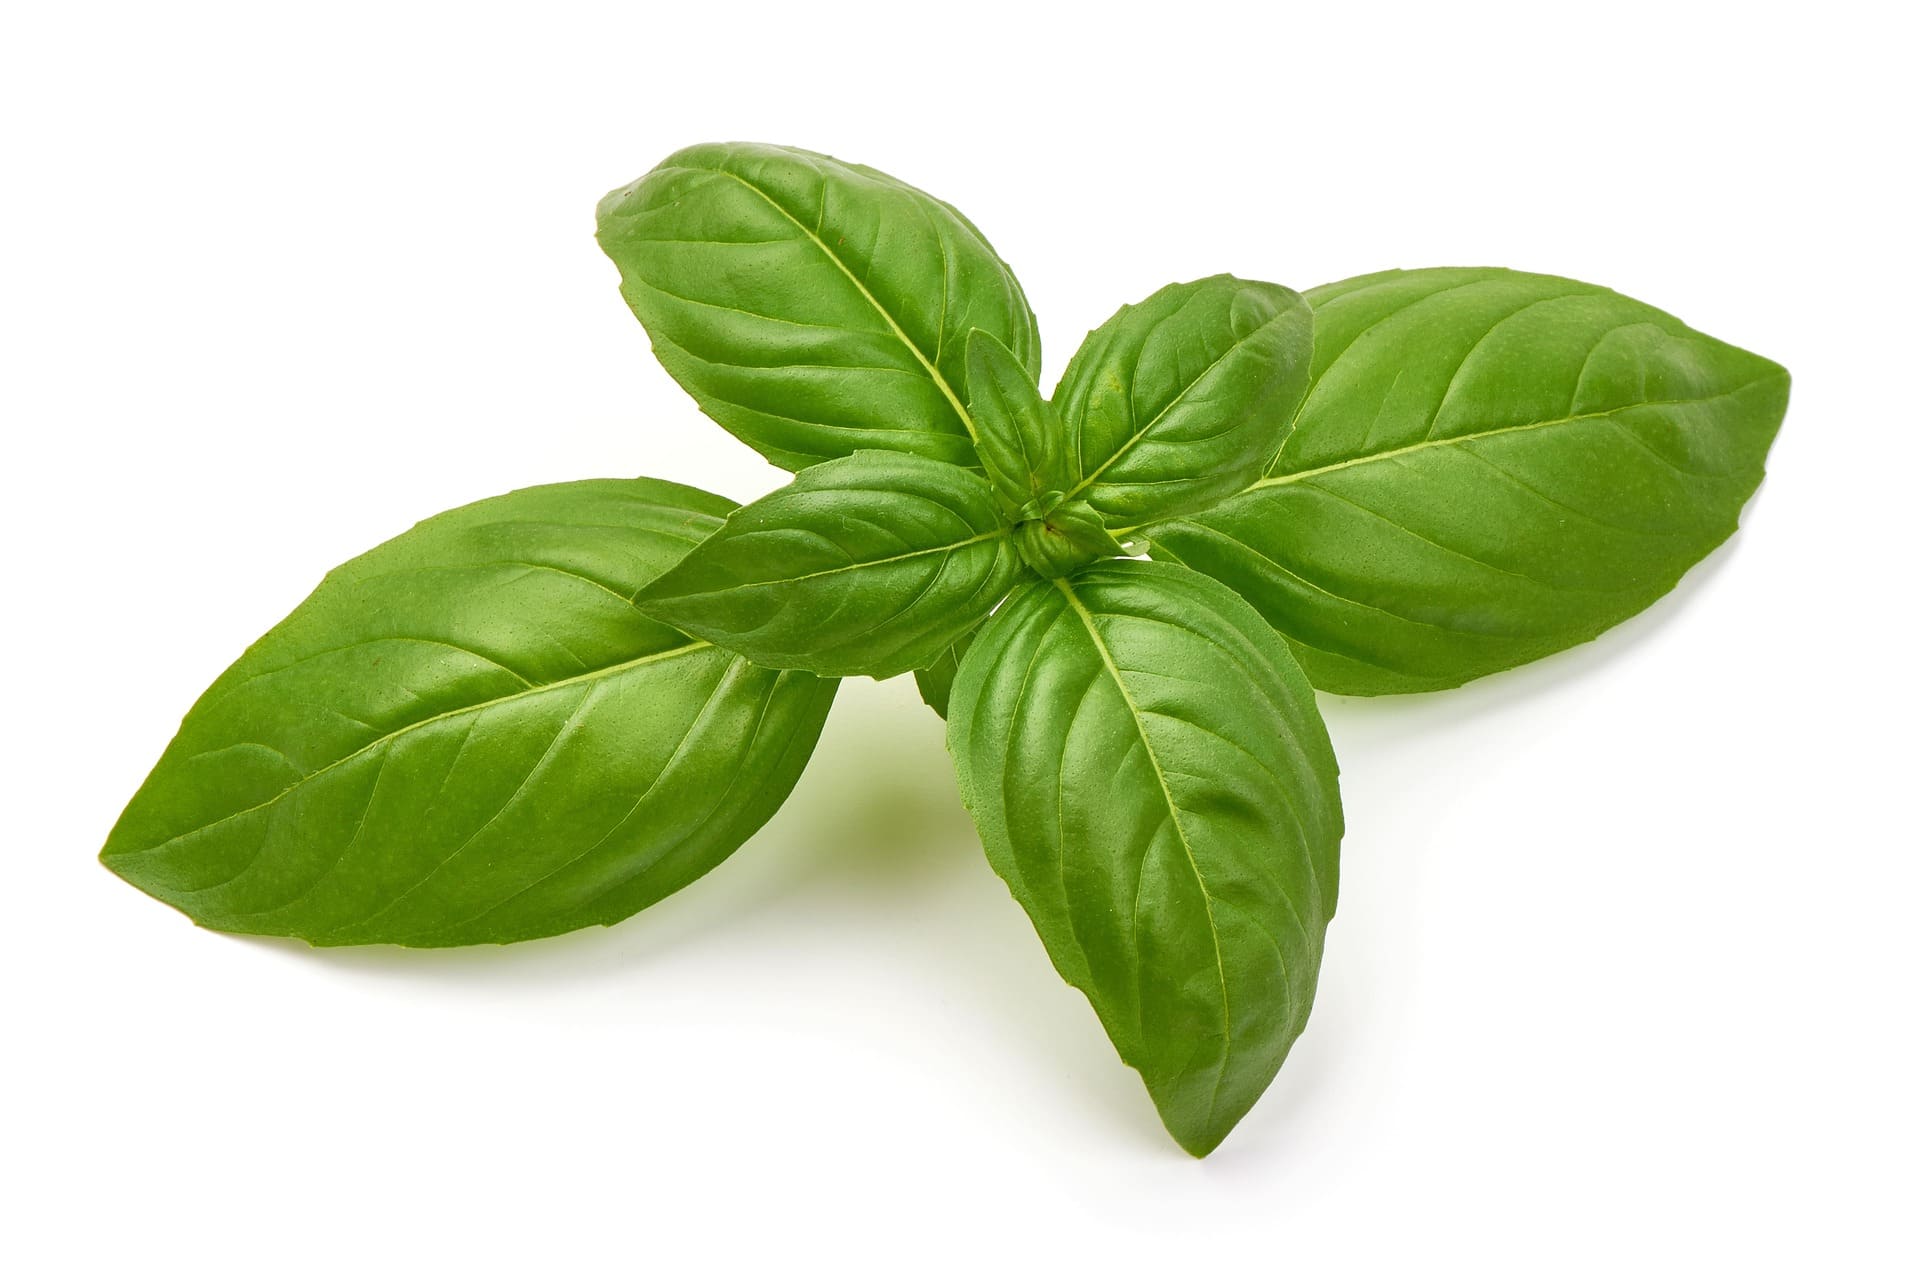 Basil-Genovese(32x - Subscription Only)